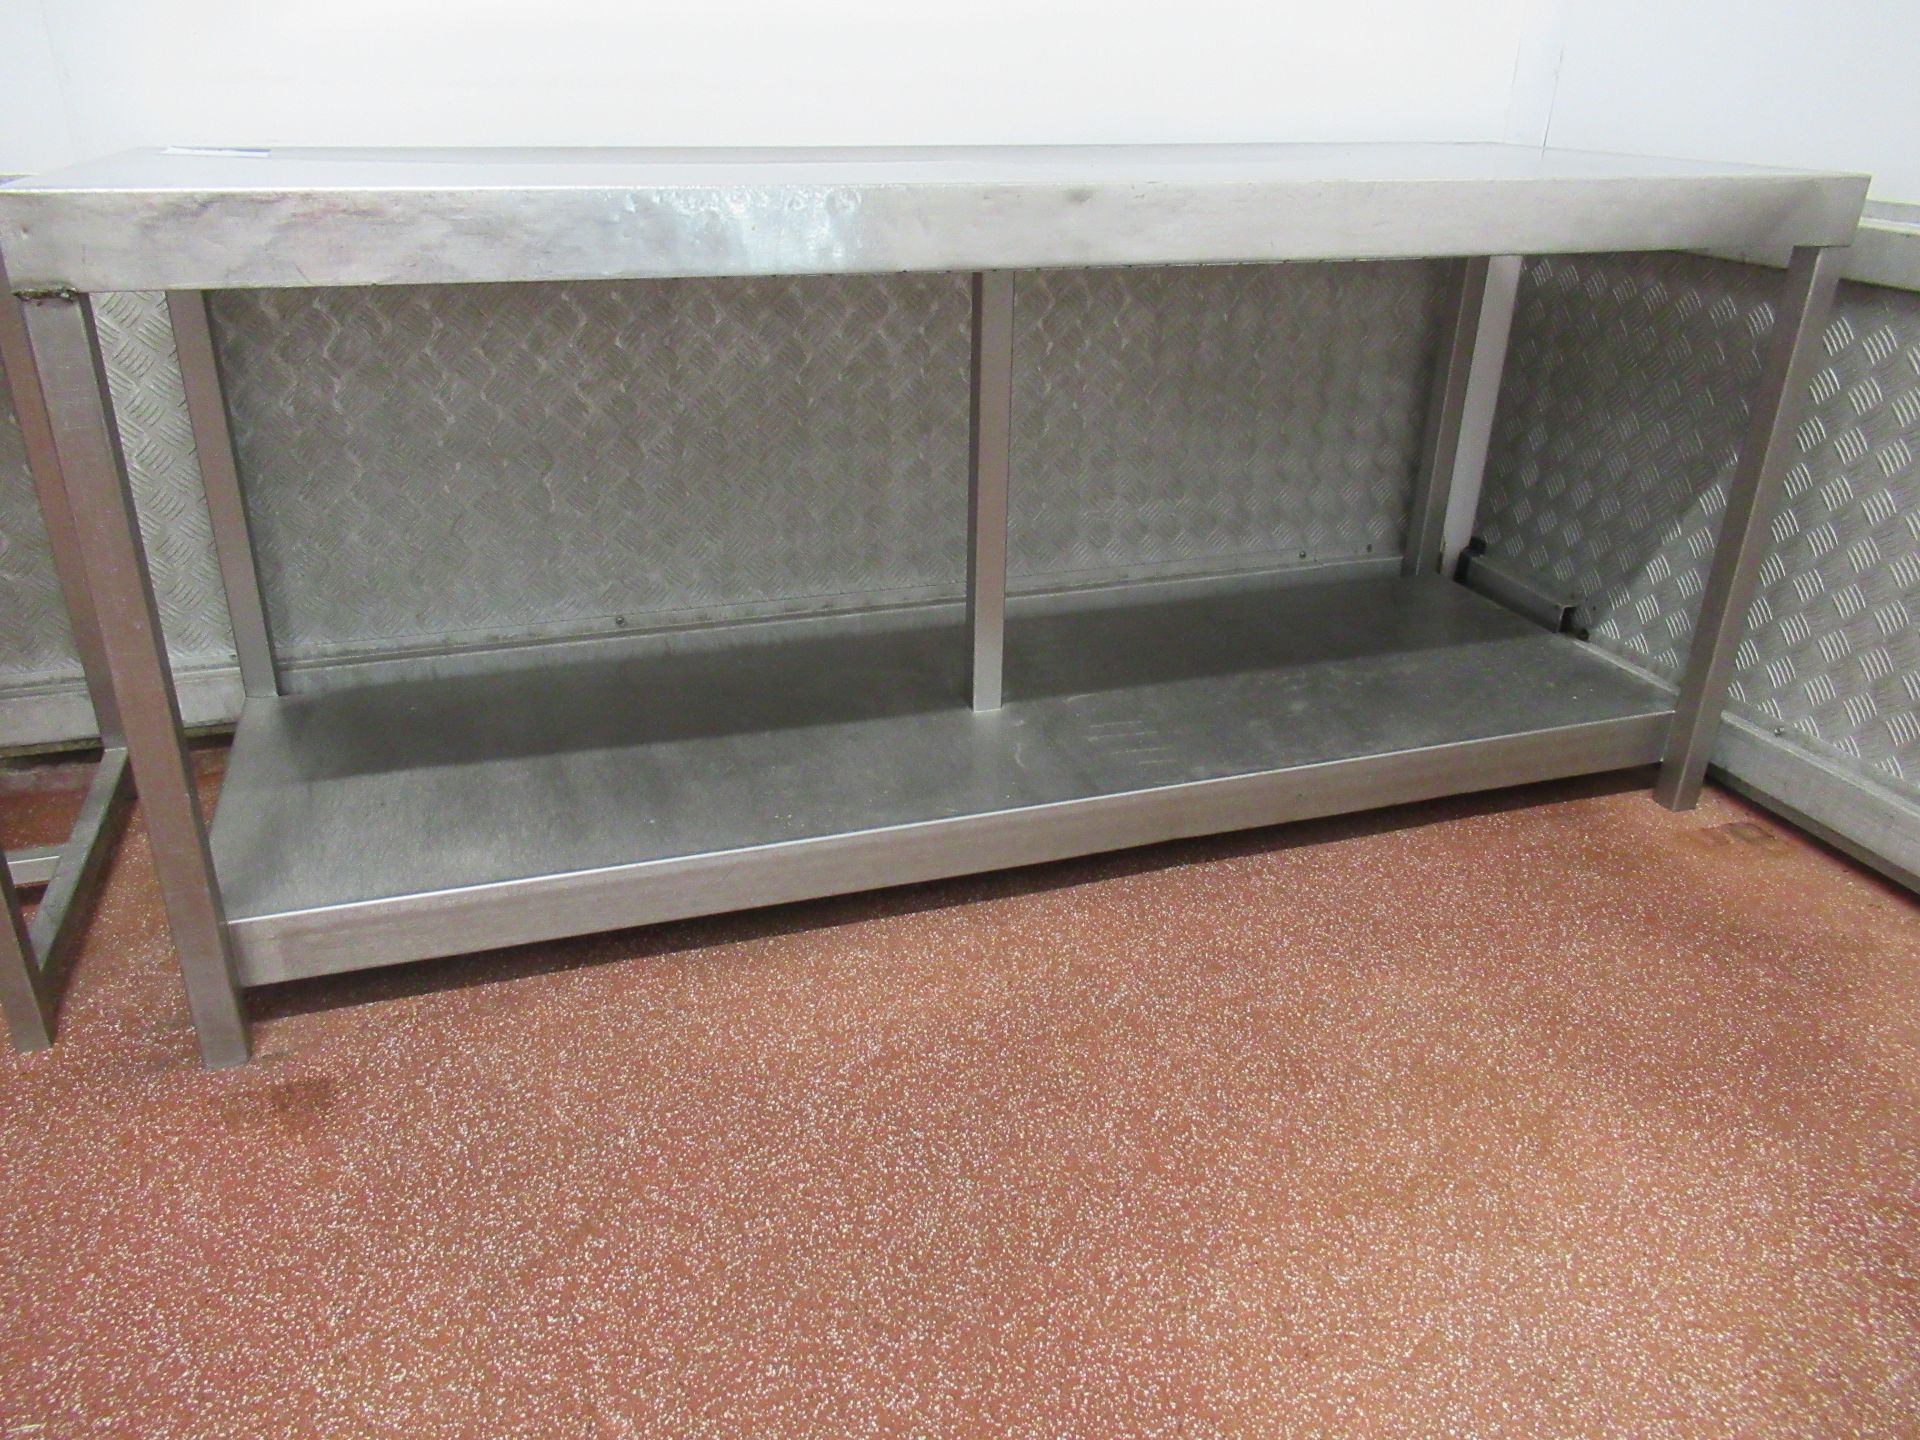 4 Stainless steel tables, one with 1800 x 600mm work surface and three with 1800 x 650mm work - Image 2 of 8